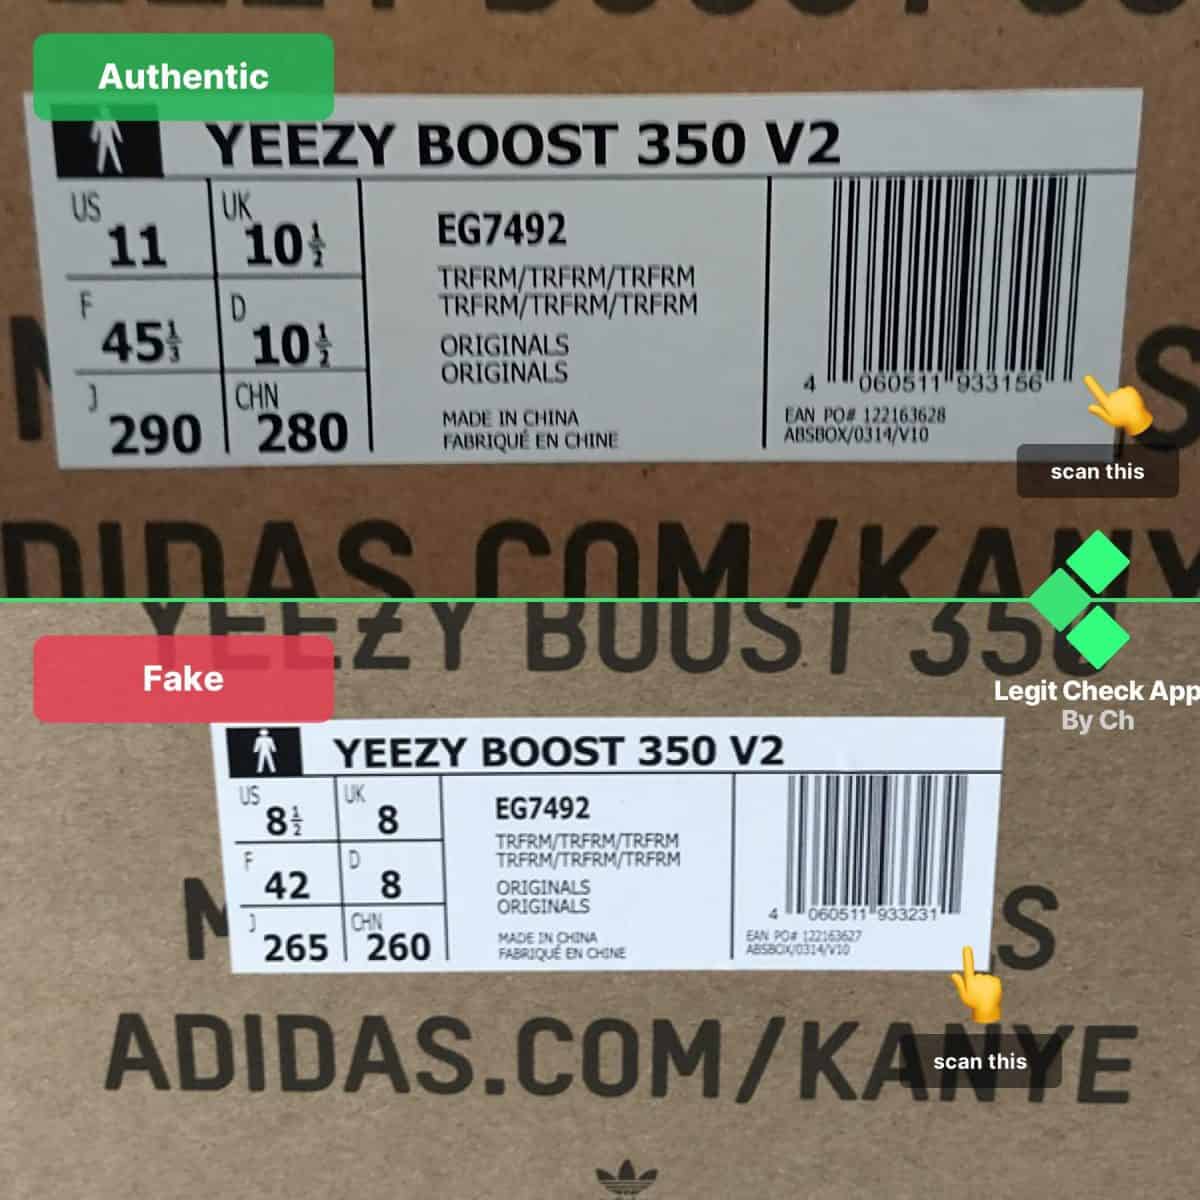 Yeezy Boost 350 V2 True Form Trfrm Authenticity Check Guide Legit Check By Ch